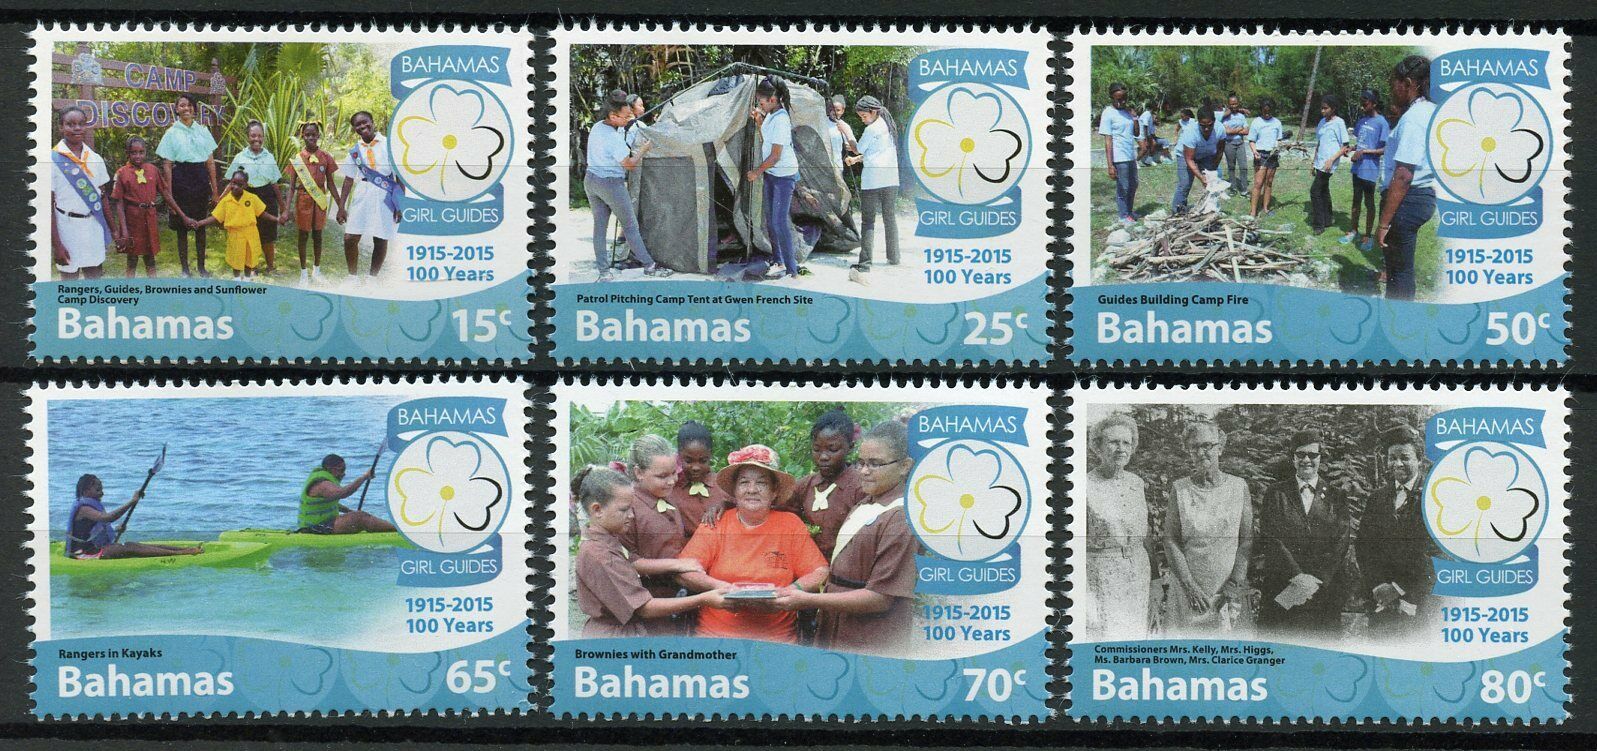 Bahamas 2015 MNH Scouting Stamps Girl Guides 100 Years 1915-2015 Scouts 6v Set